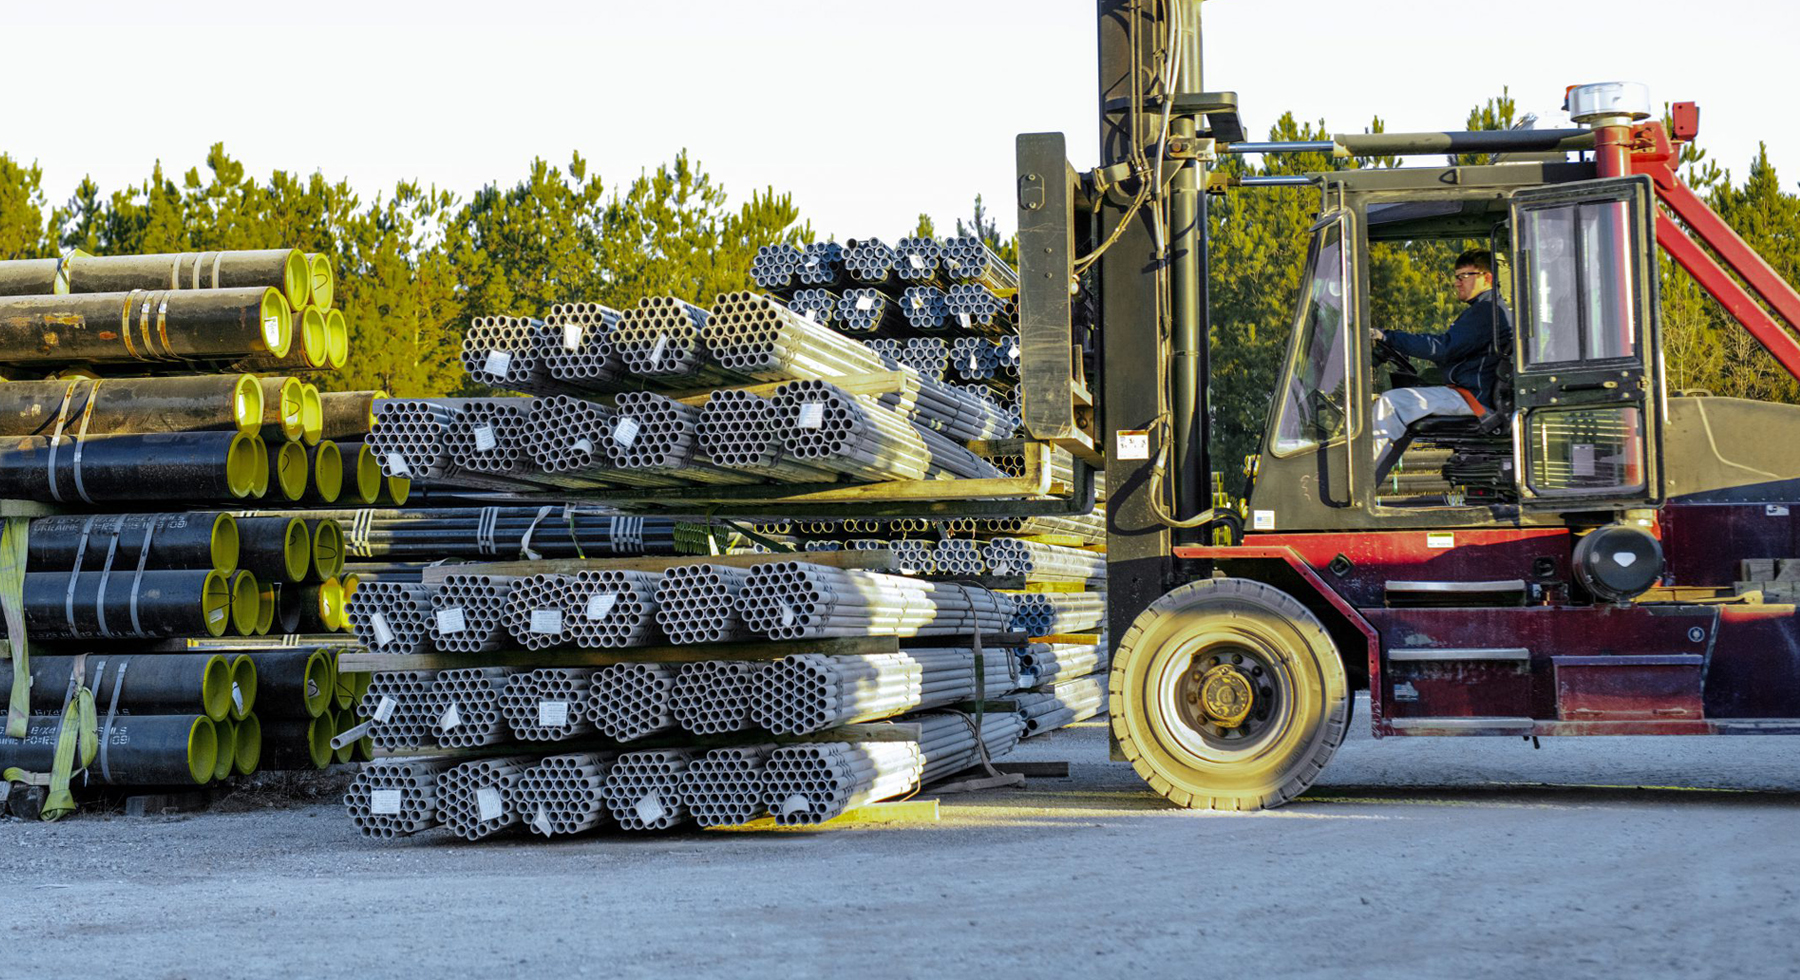 Ferguson Indsutrial unloading a large supply of pipes to a customer in need of industrial turnaround support.